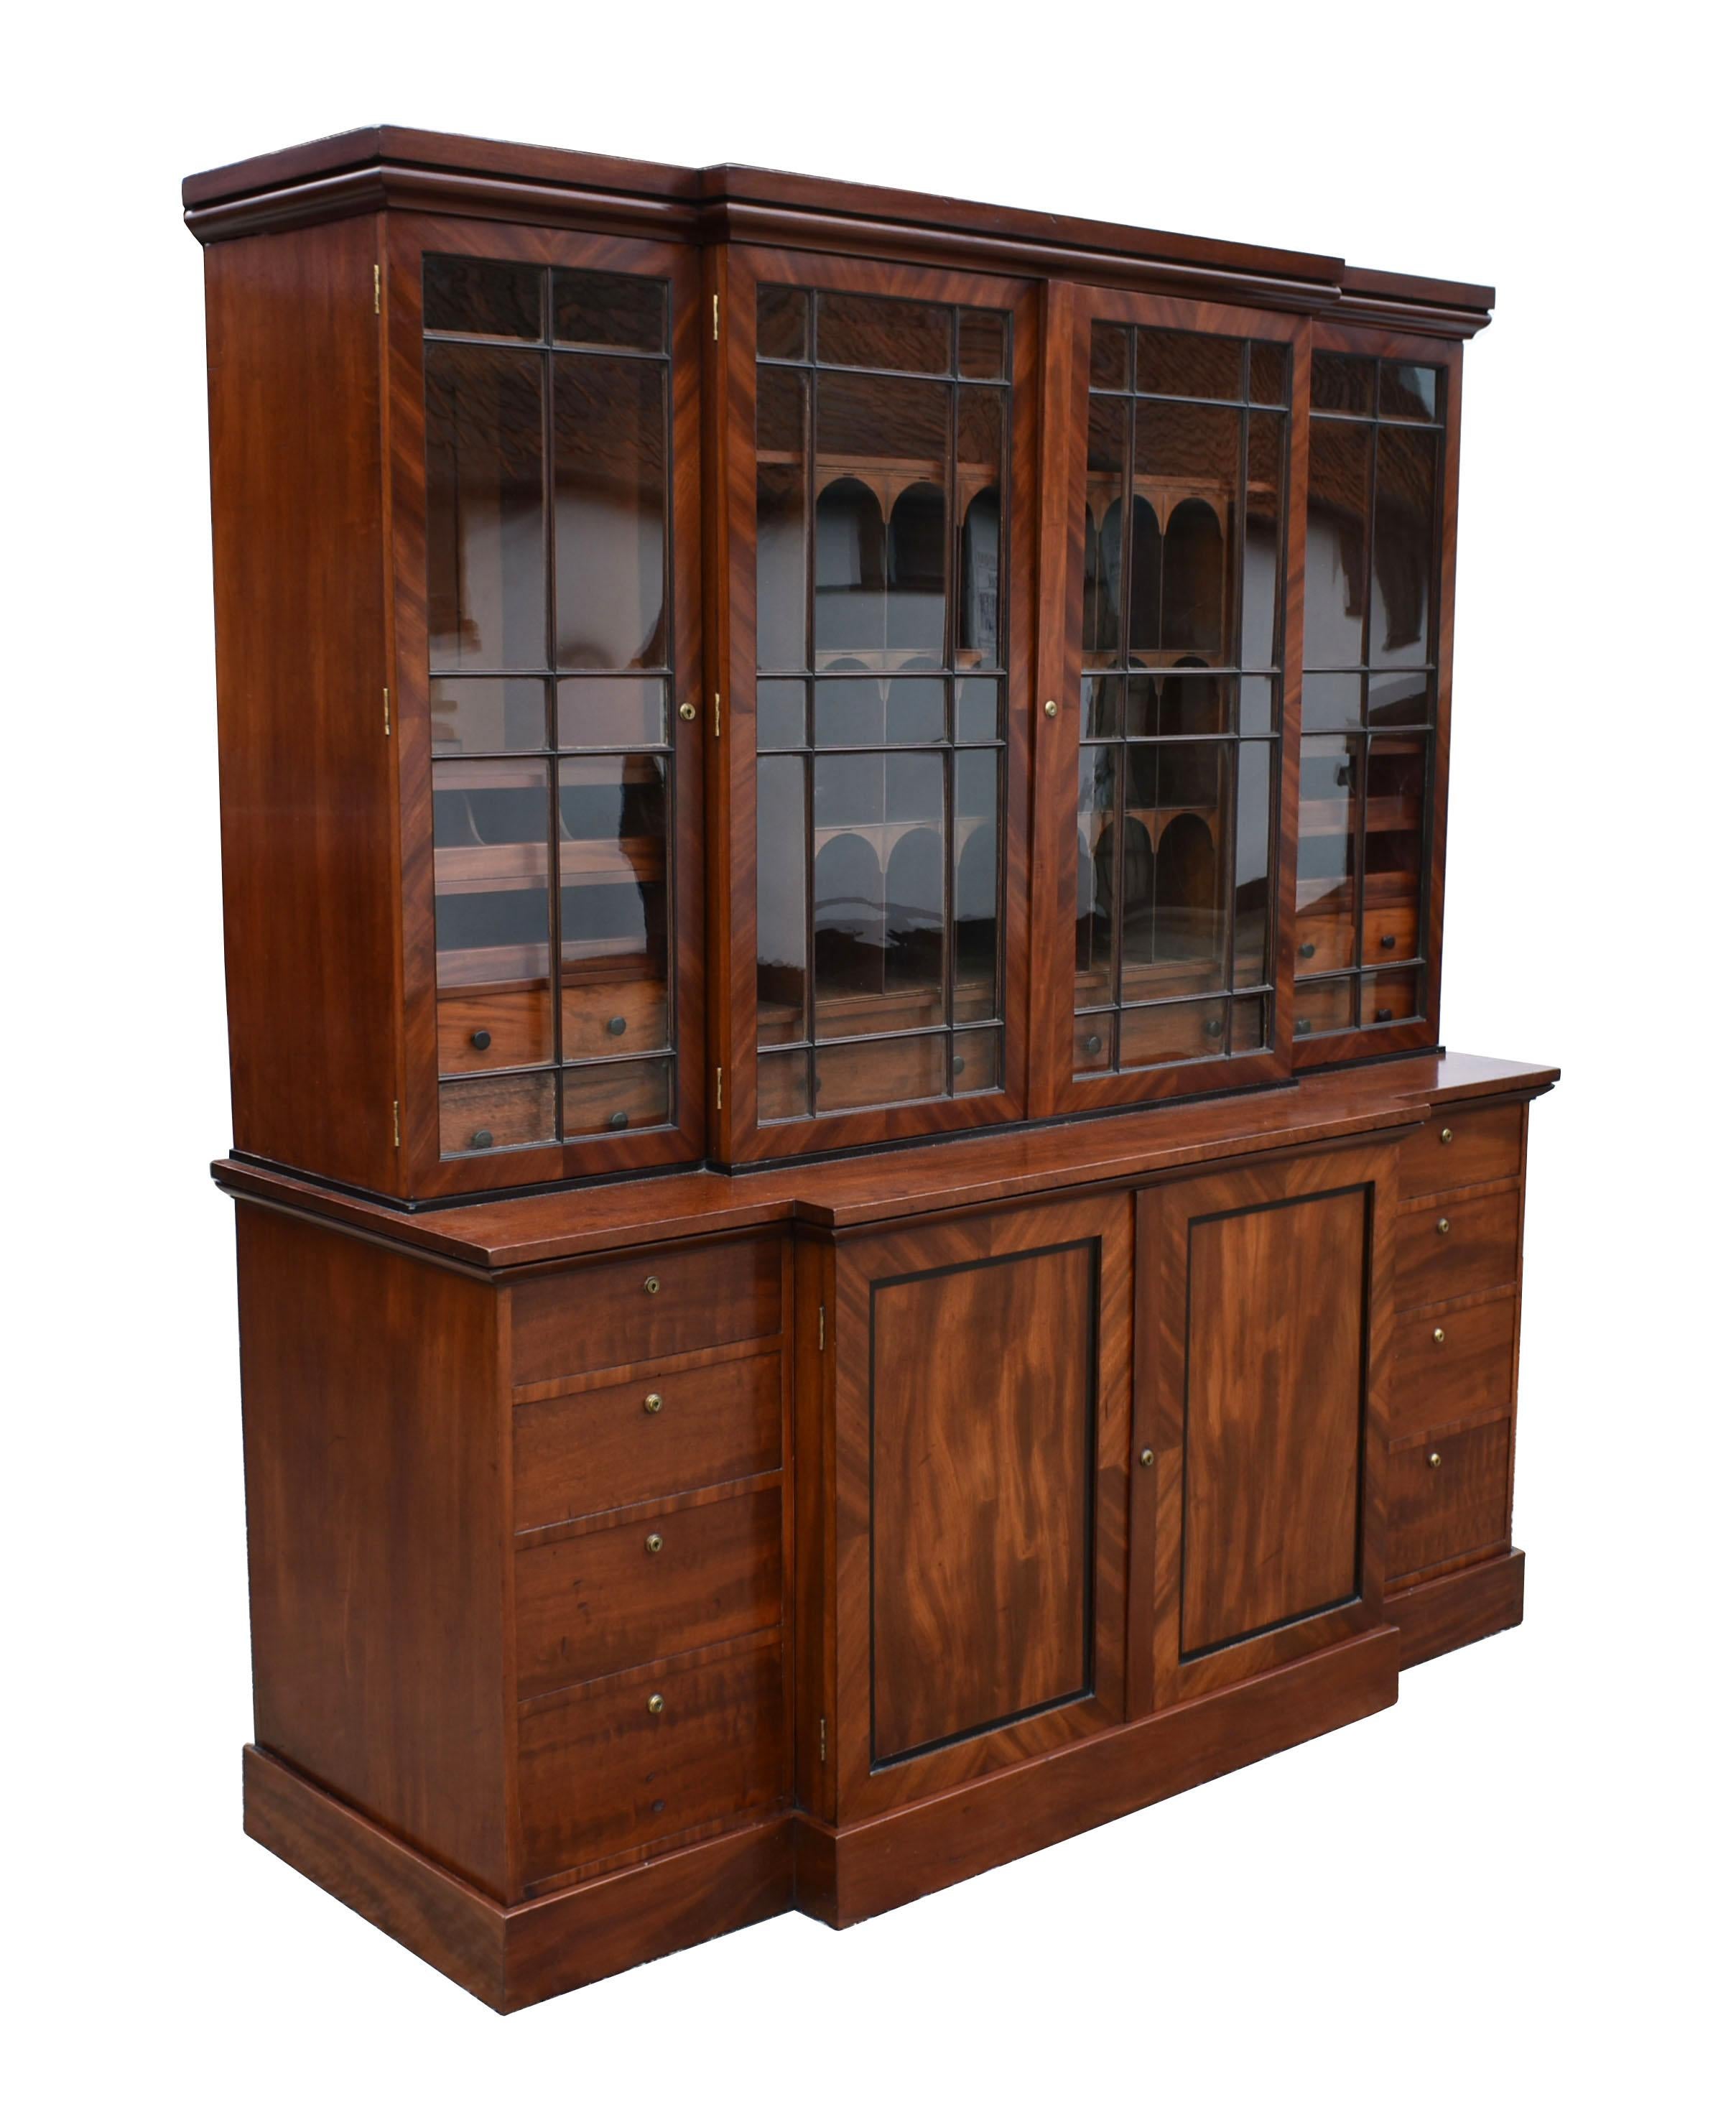 For sale is a top quality George III mahogany breakfront bookcase. The top of the bookcase has flour glazed doors, each opening to reveal a fitted interior. The centre doors open to display various pigeon holes over several drawers. Each side door